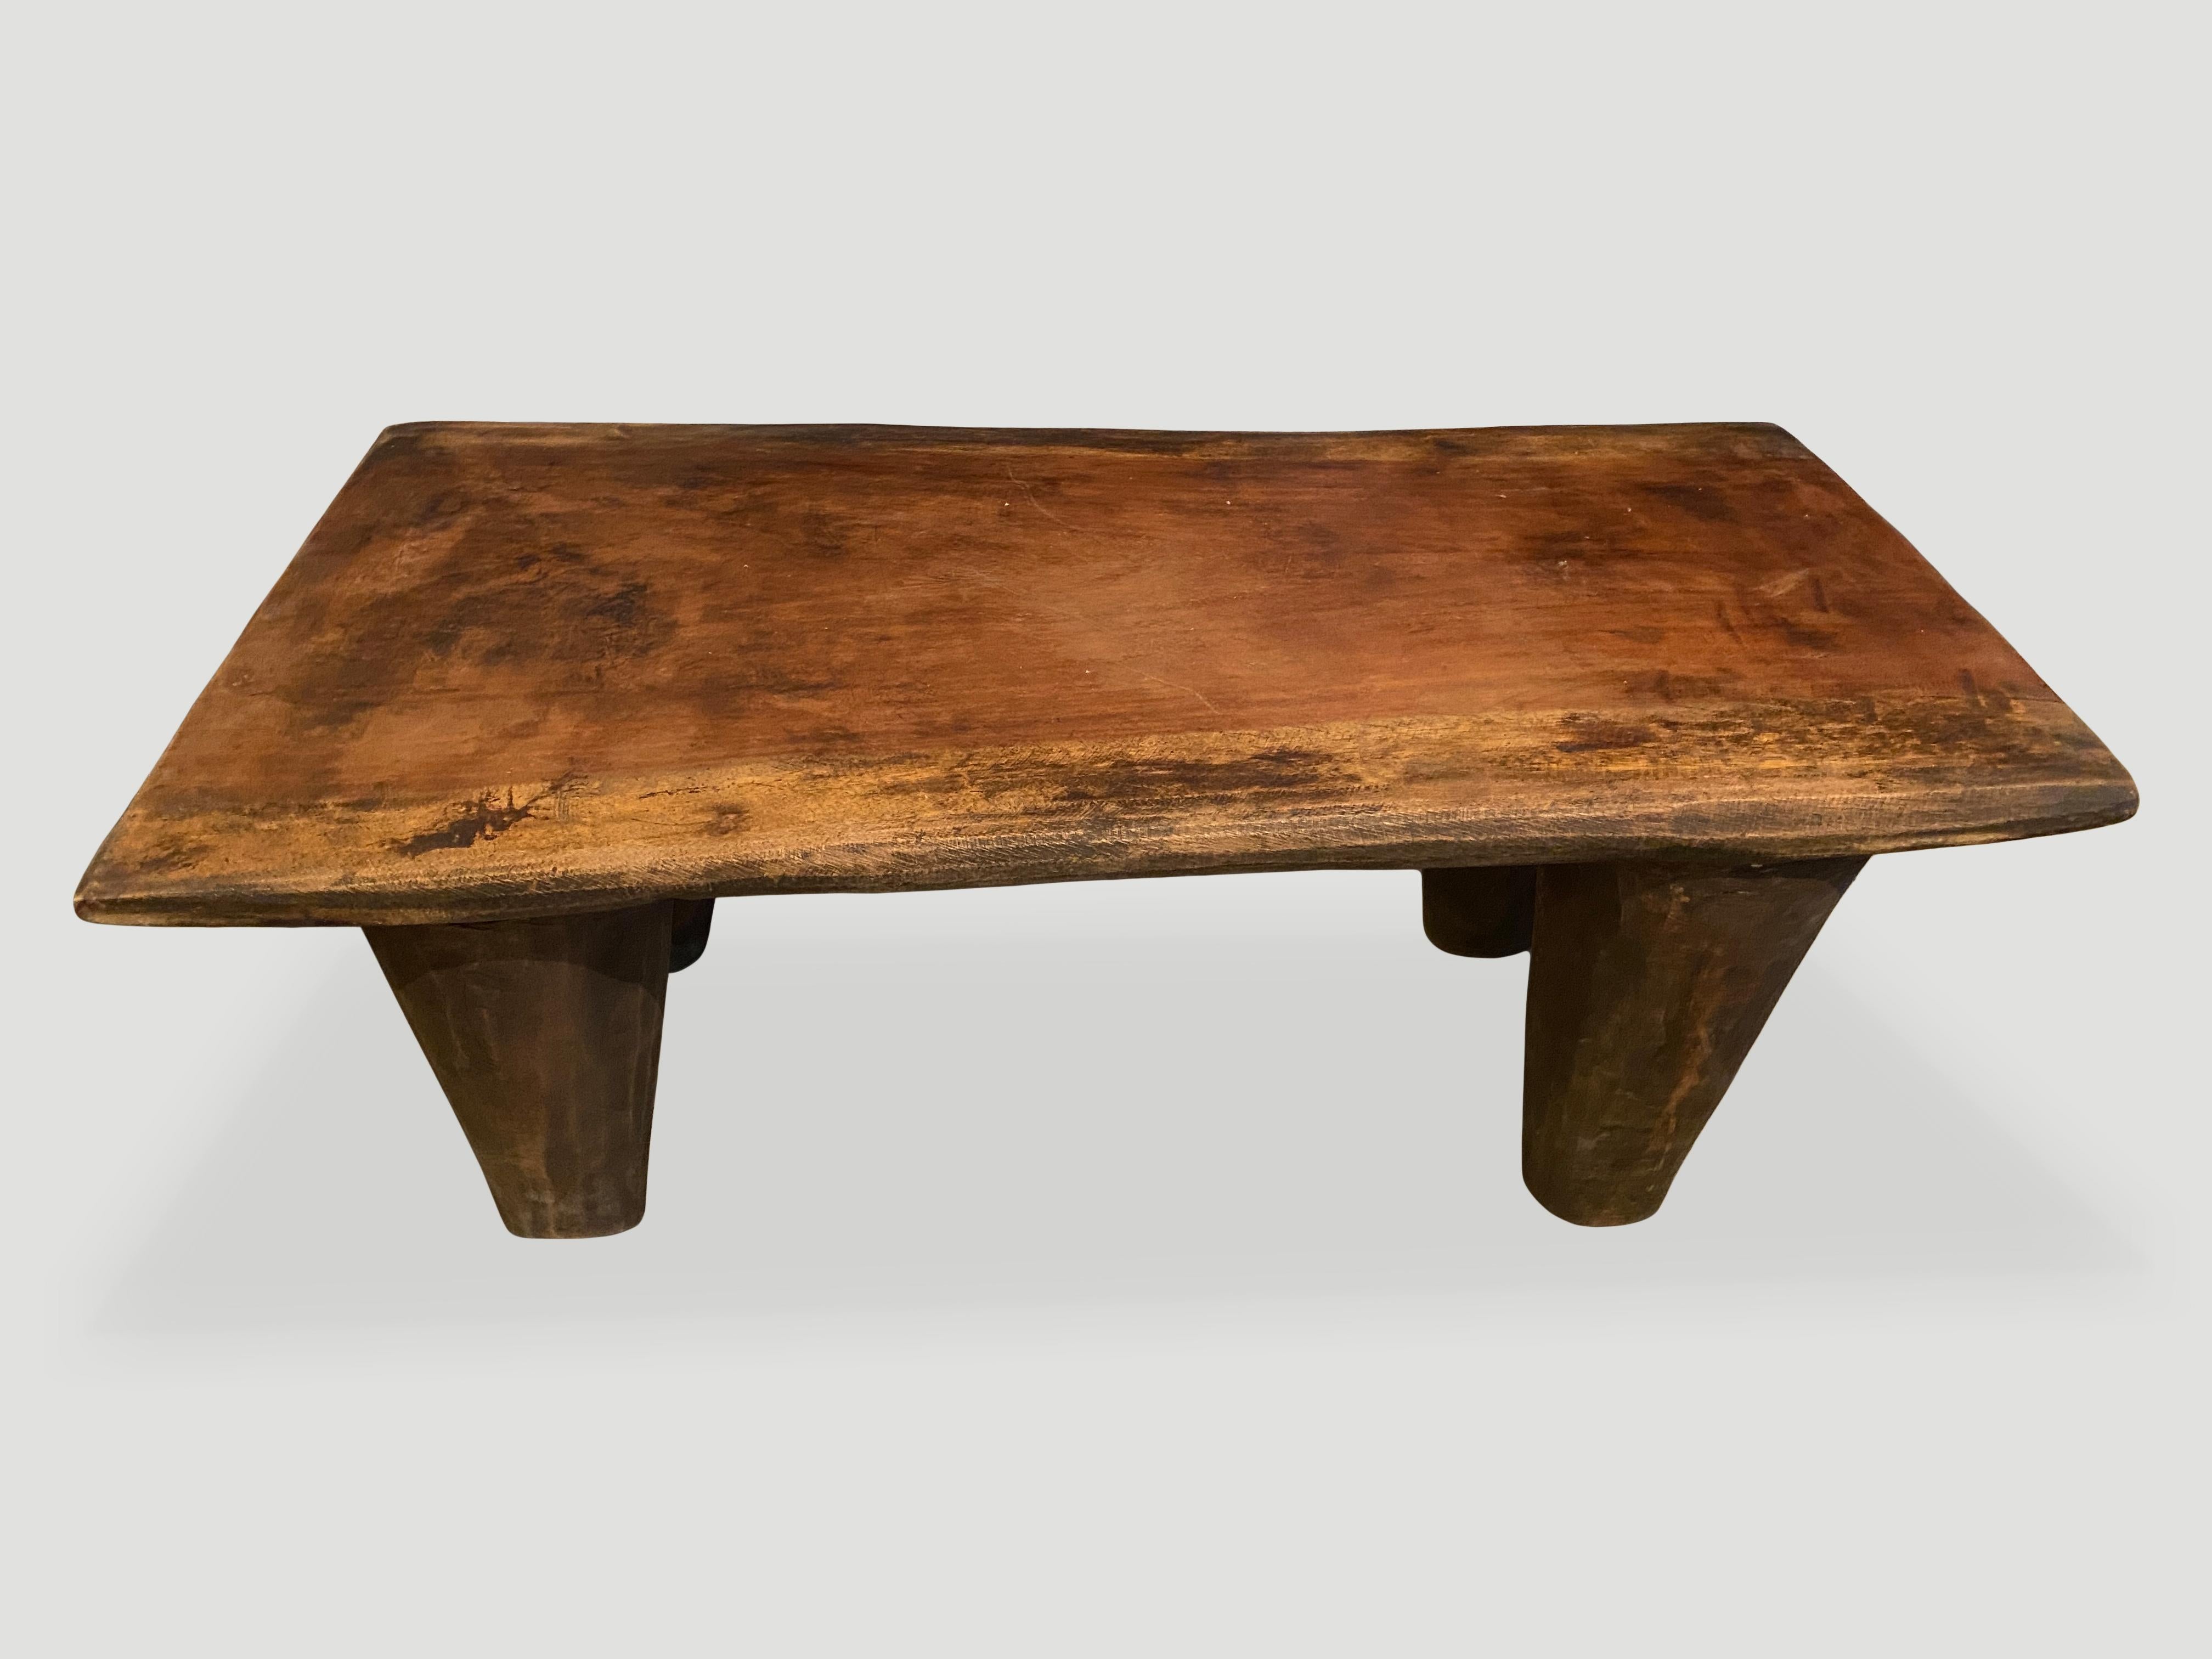 Antique coffee table or bench hand carved by the Senufo tribes from a single block of iroko wood, native to the west coast of Africa. The wood is tough, dense and very durable. Shown with cone style legs. We only source the best. 

This bench or